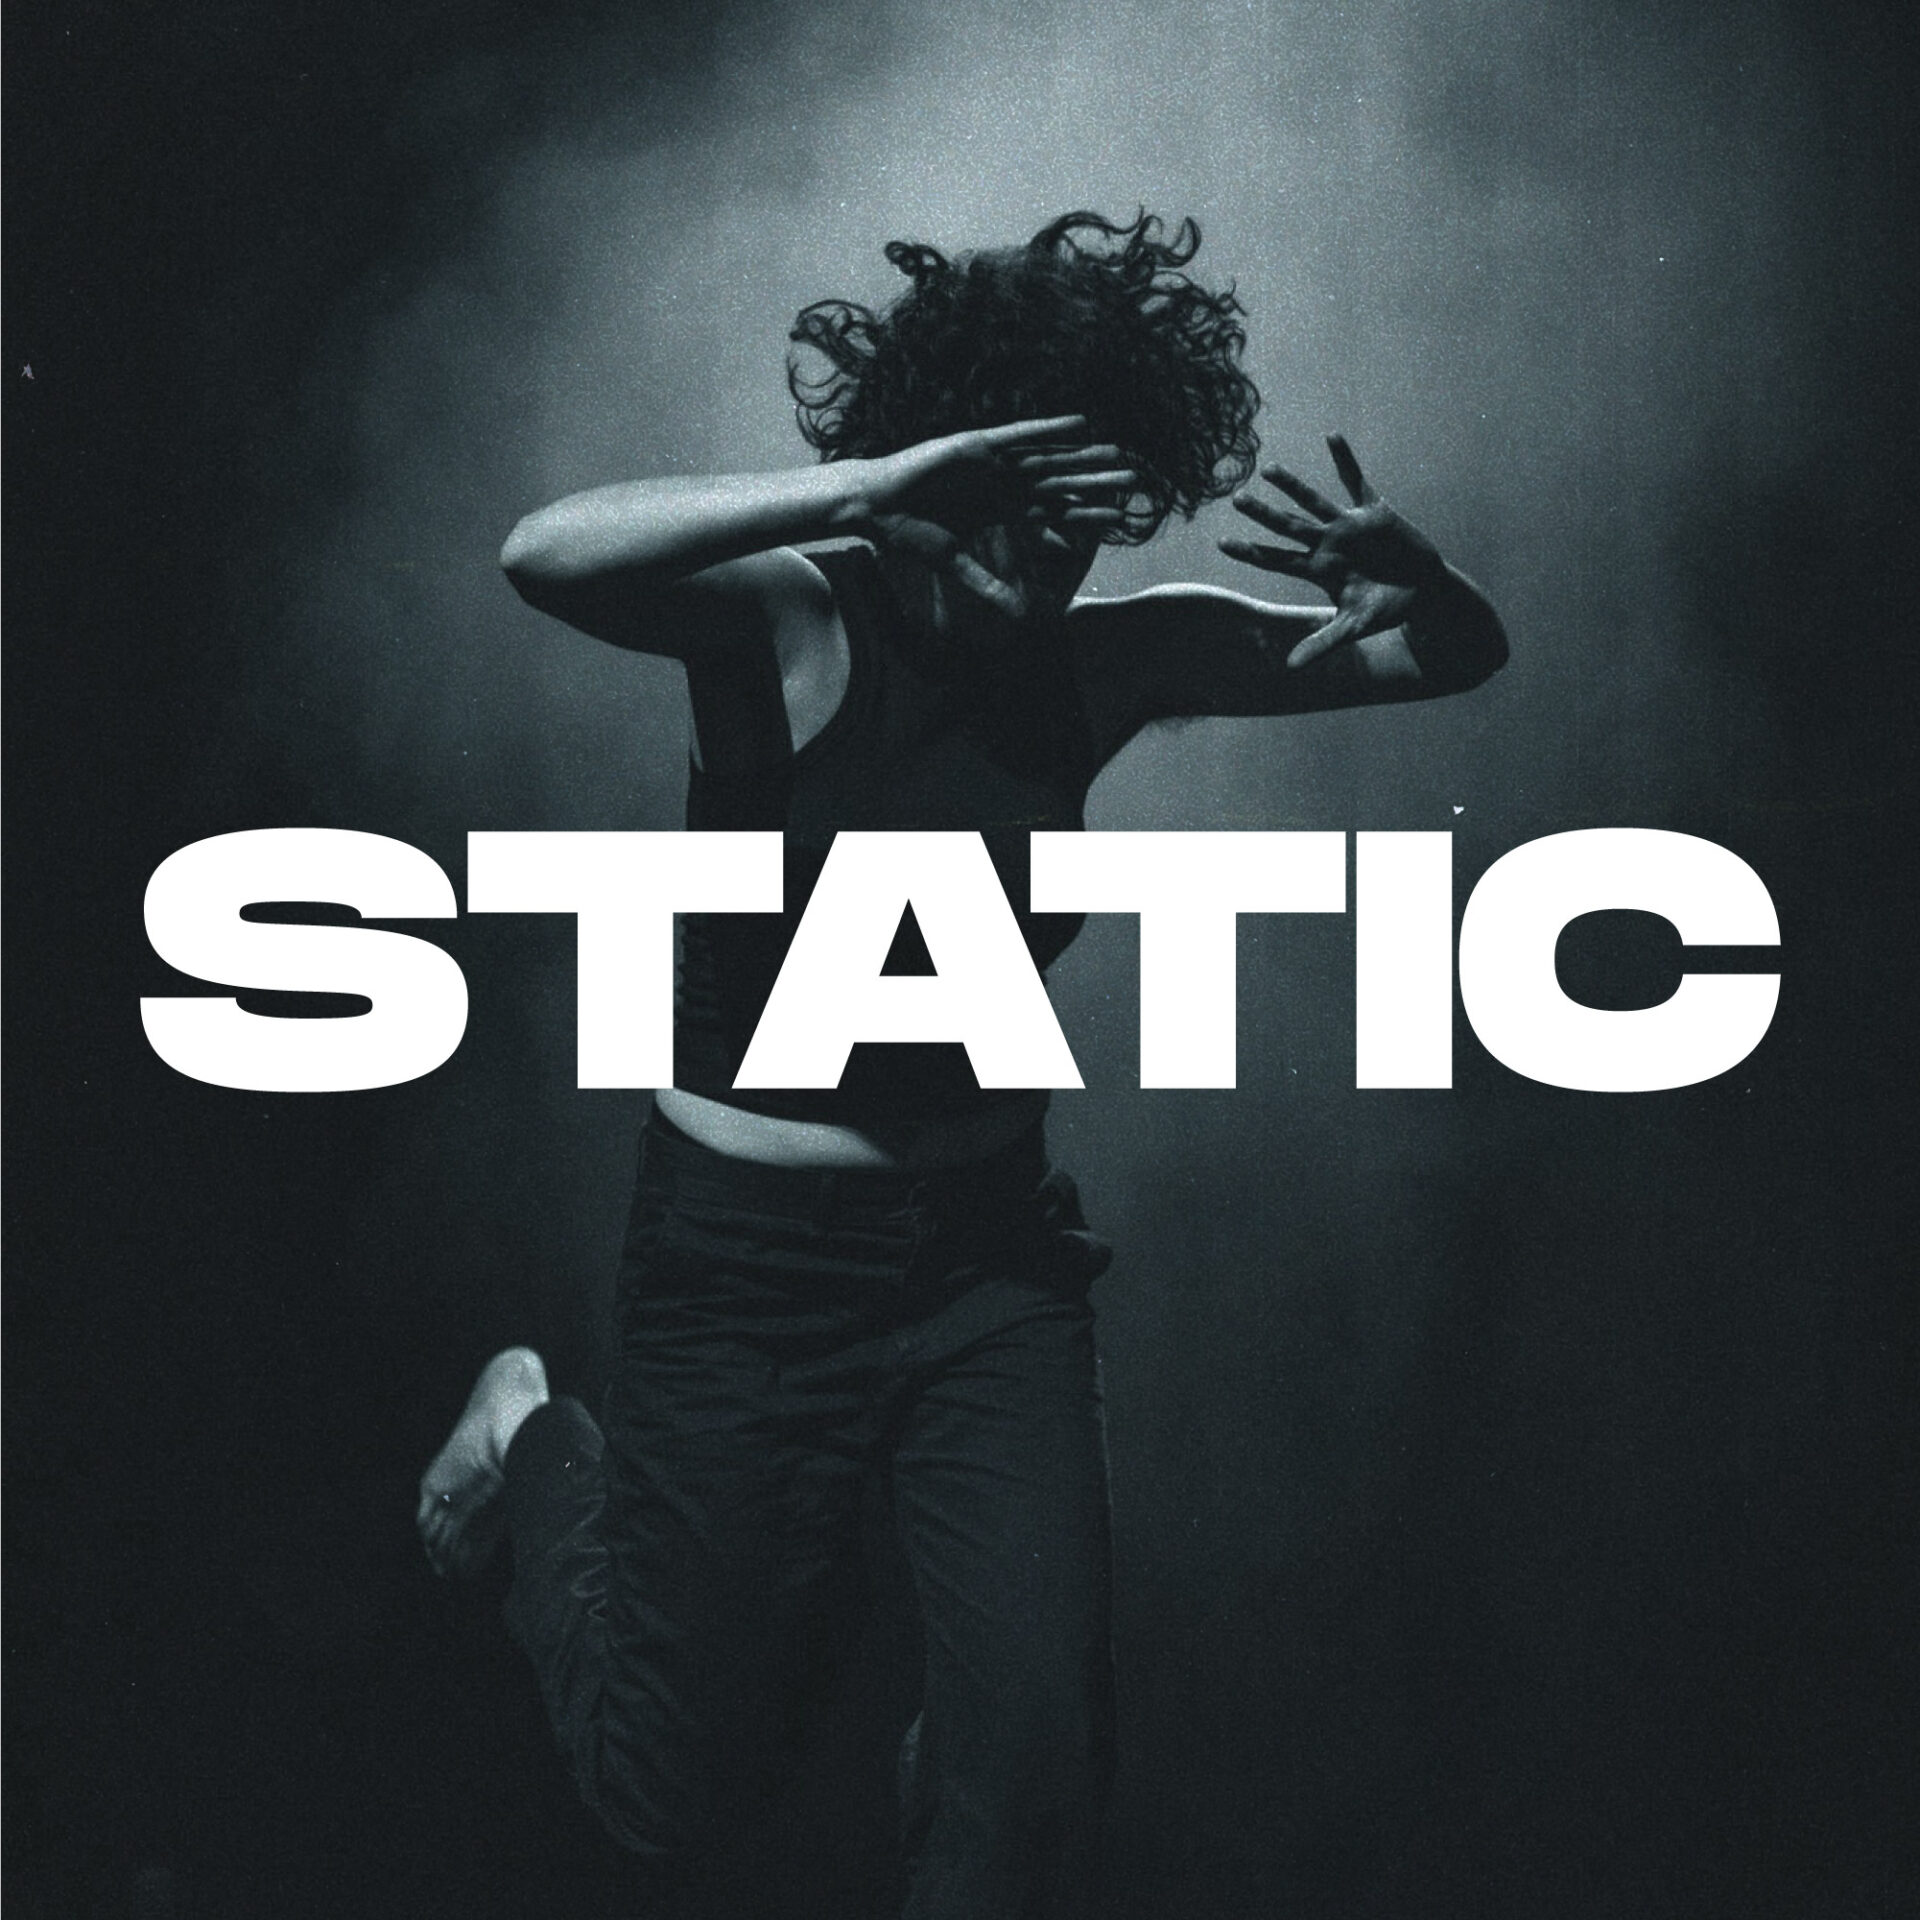 static by OIEE ft. Nomé, Dom Beat cover art, from Brainchild